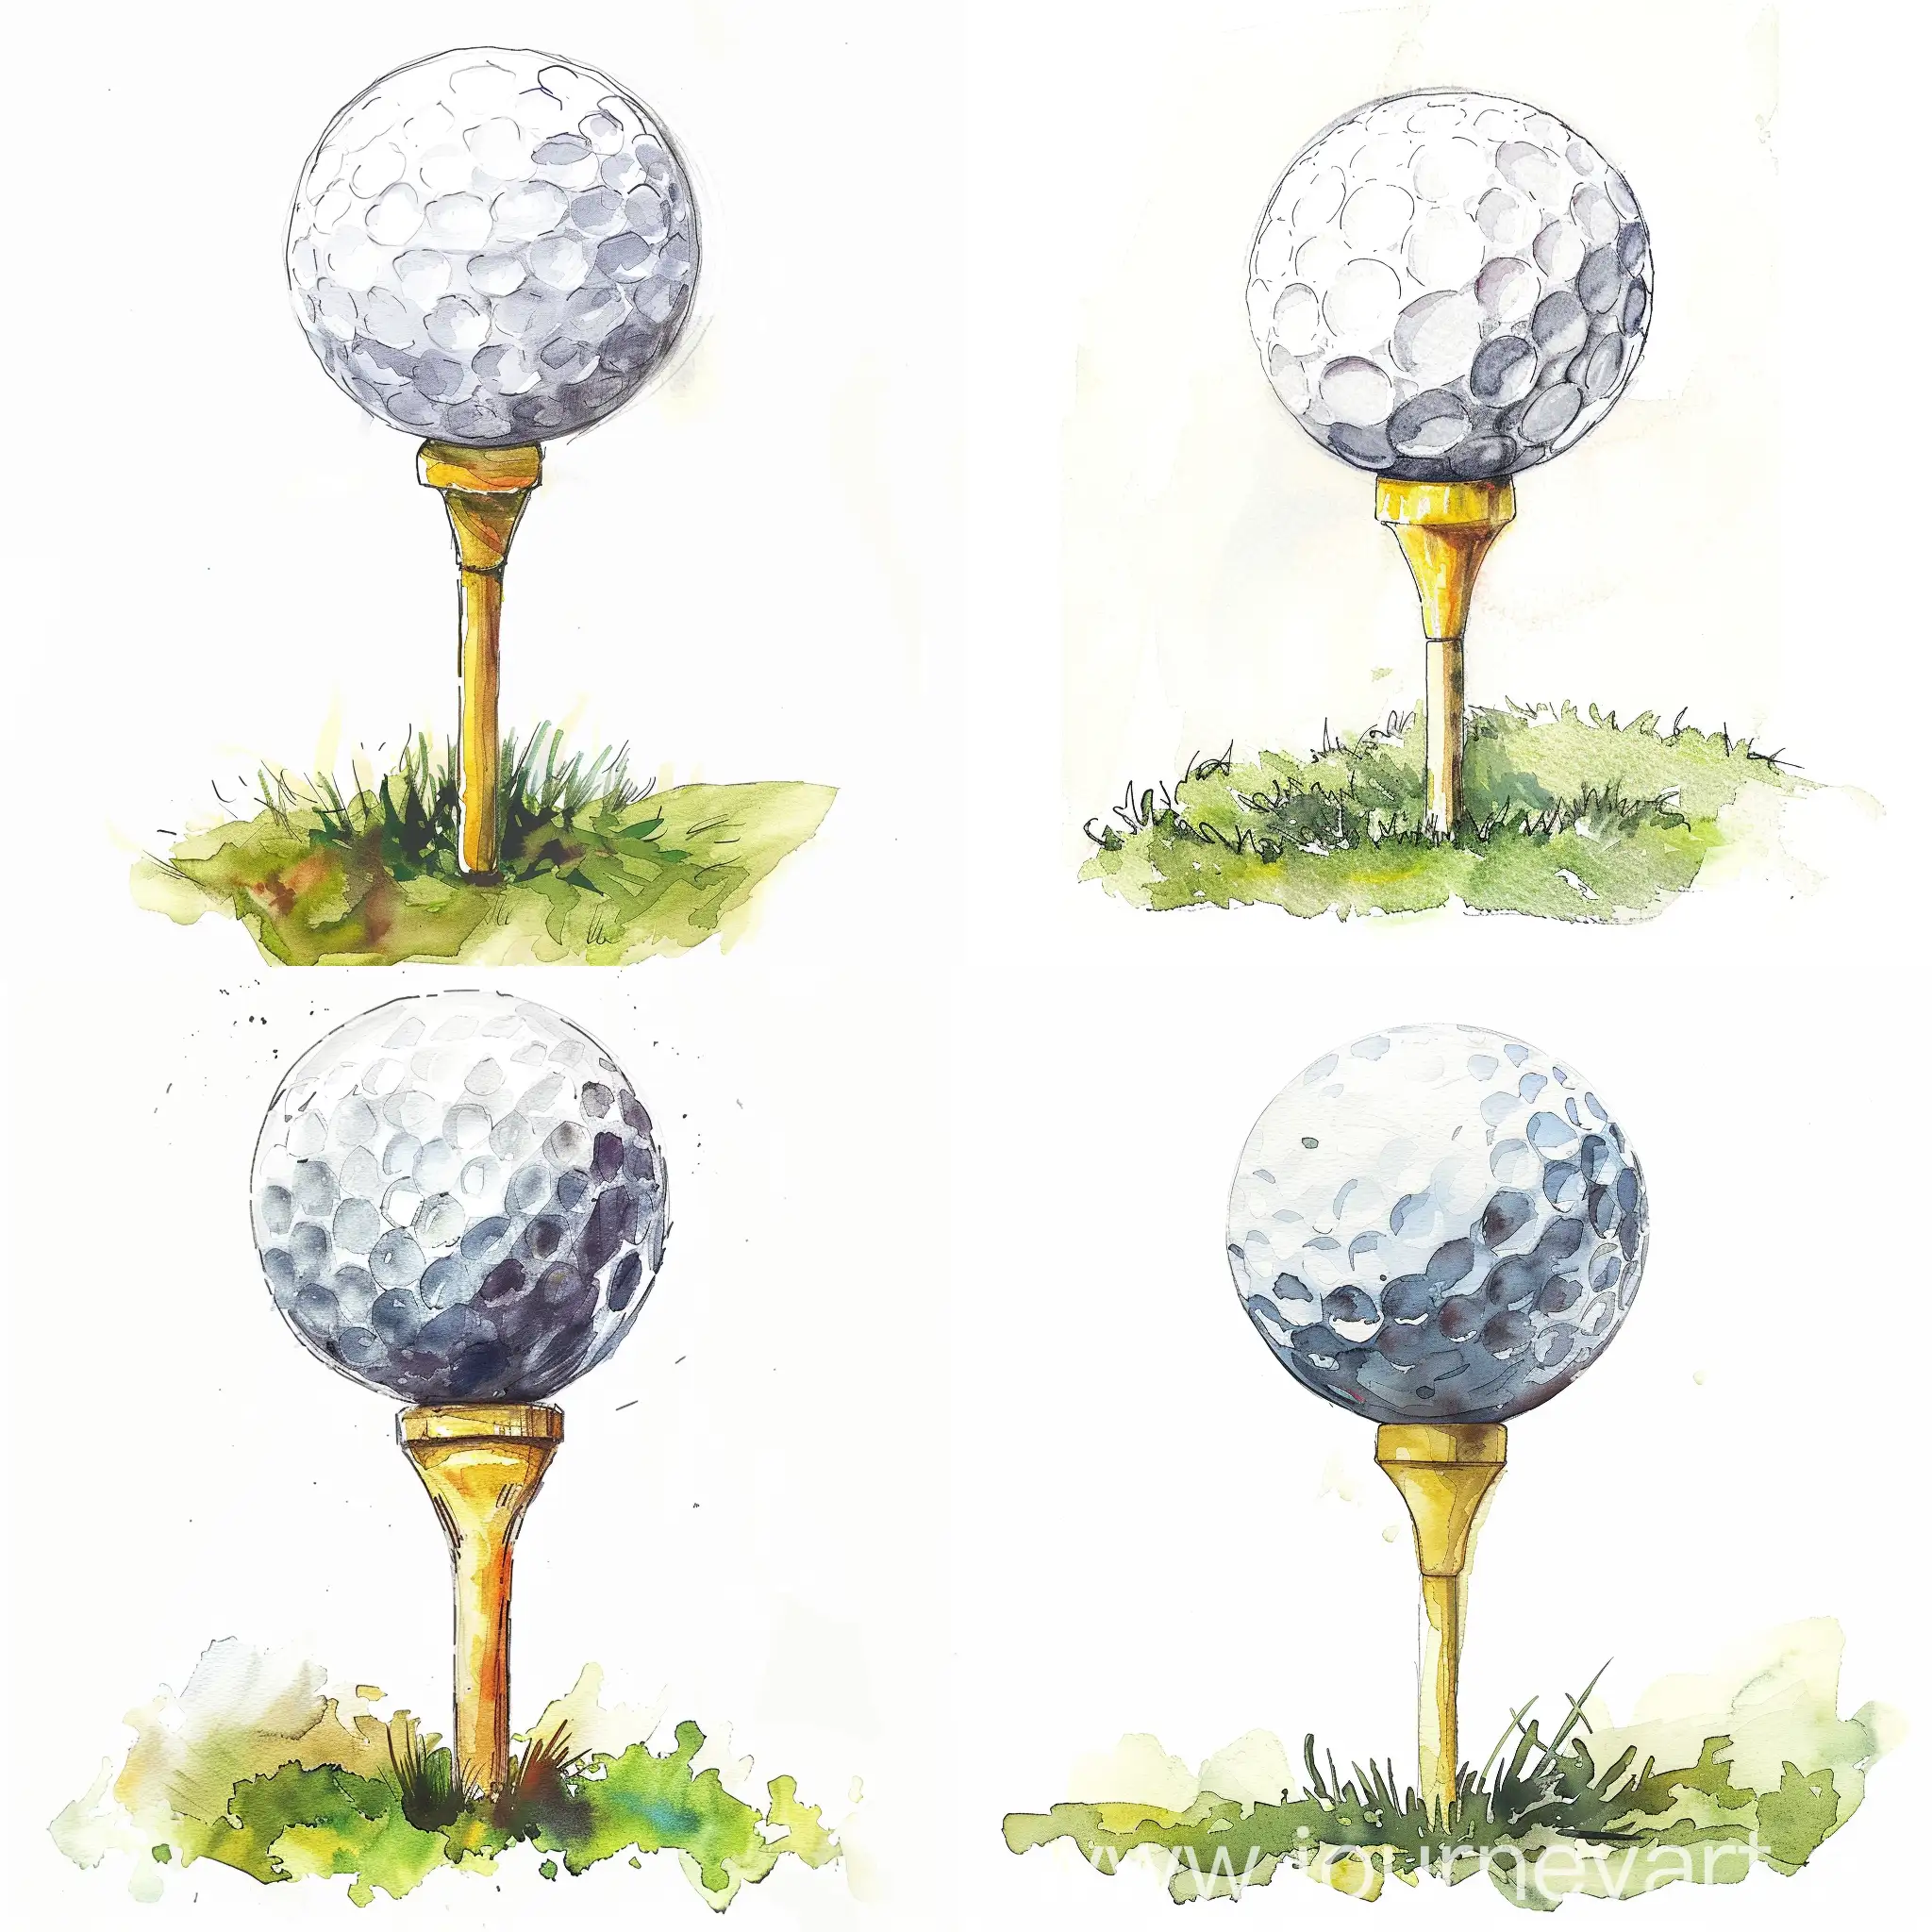 Your task is to create a stylized hand darn sketch of a golf ball on a tee, using a watercolor painting style.
The golf ball should be white in color, sitting atop a bright yellow tee.
Below the tee, include a small patch of green grass, adding a touch of nature to the composition.
The background should be a stark white, providing a neutral canvas that emphasizes the subject and allows the colors to pop.
Use a watercolor painting style, with soft, slightly translucent brushstrokes to give the illustration a delicate and artistic feel.
The overall composition should be simple and focused, with the golf ball and tee being the main elements.